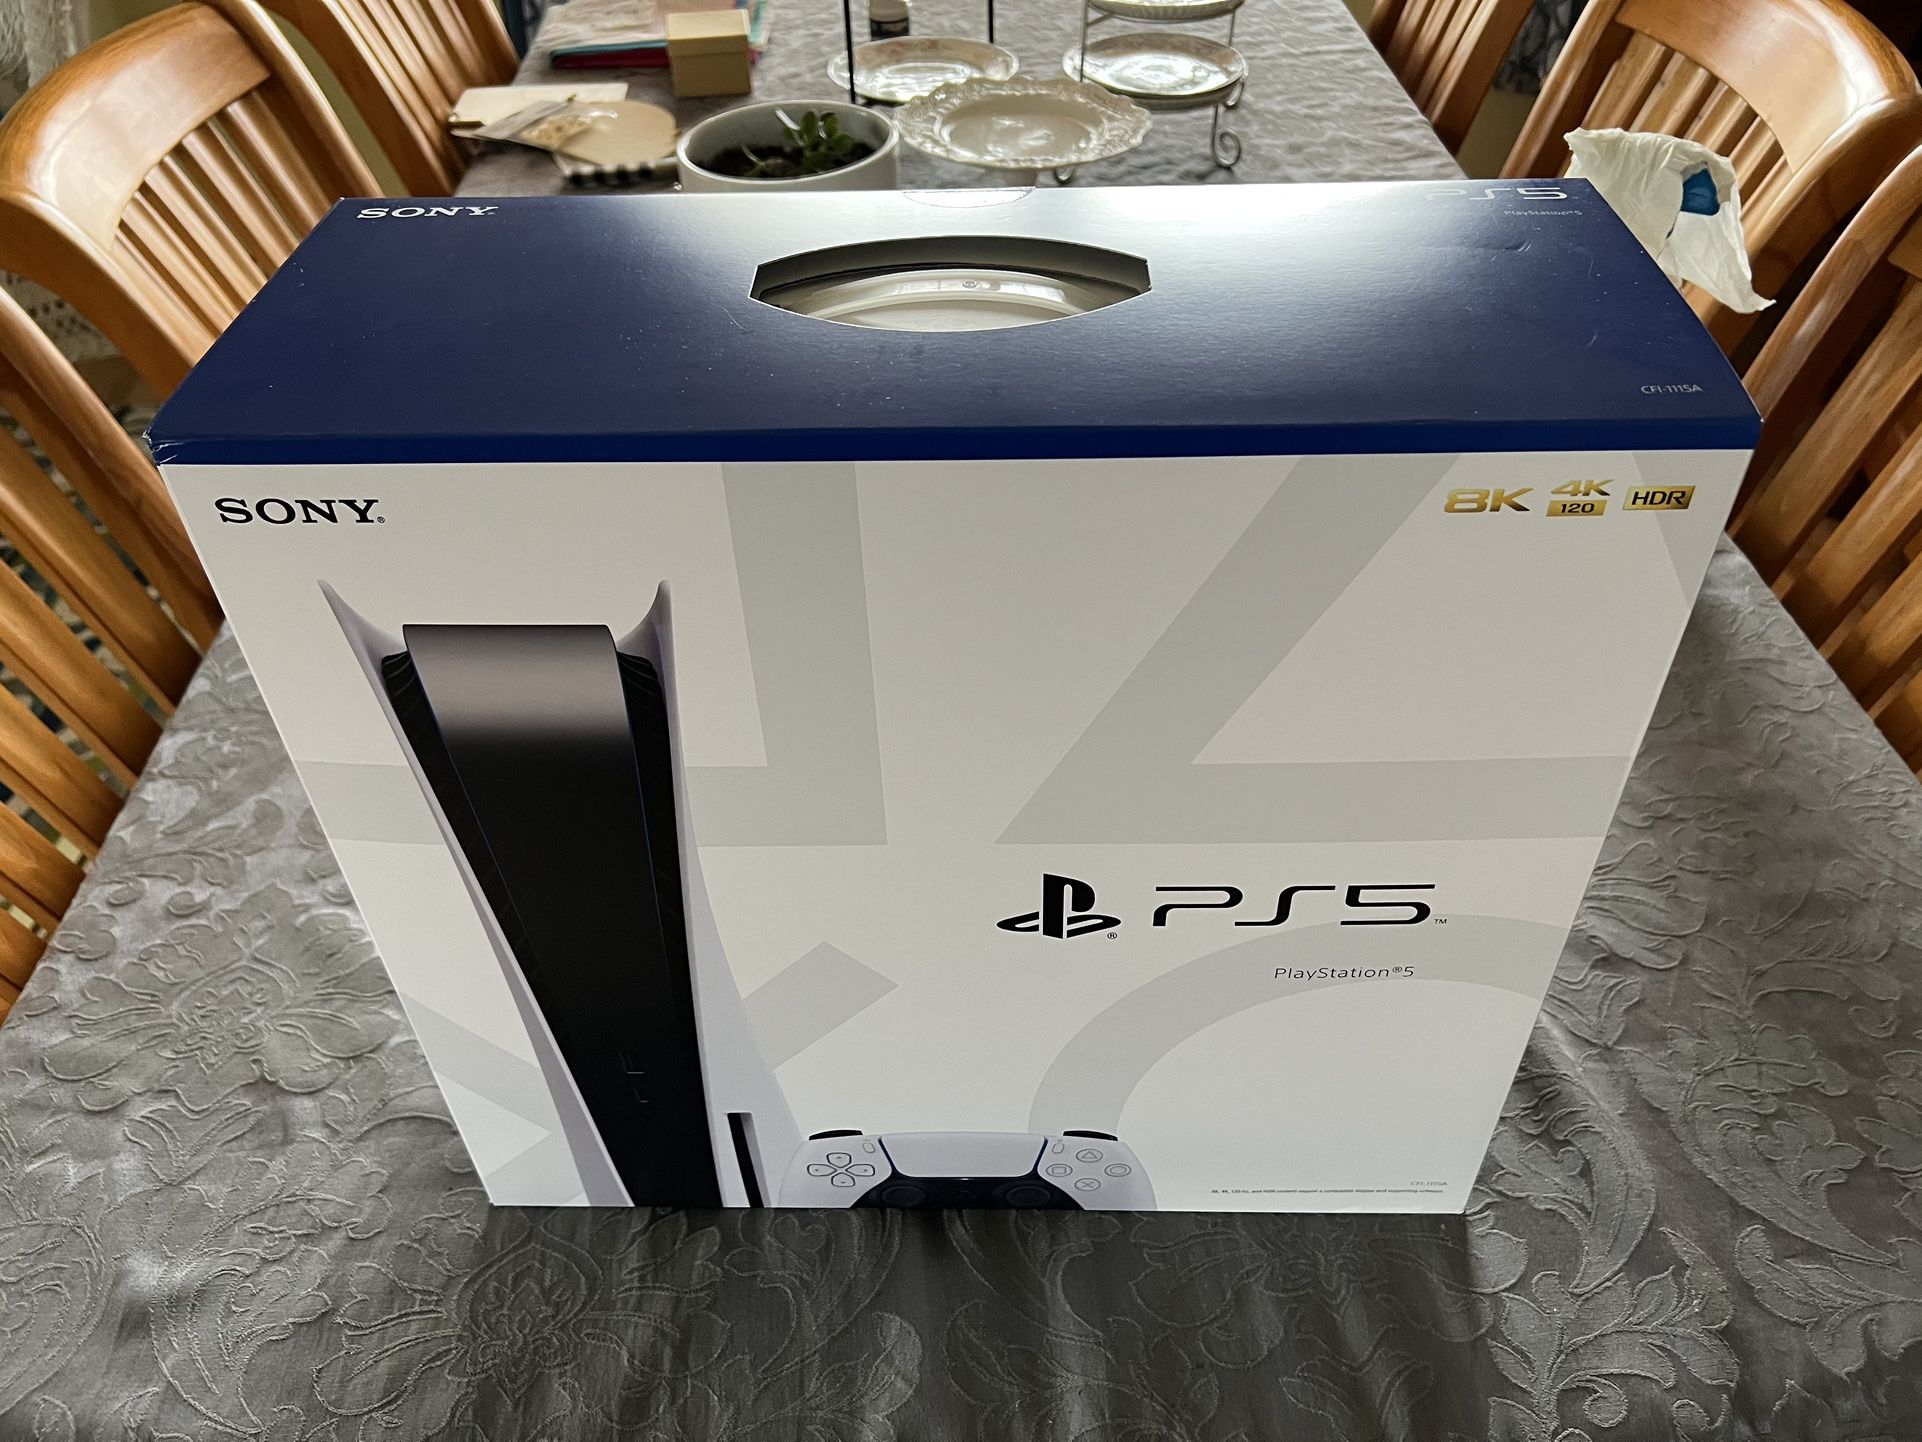 PS5 -Brand New- Factory Sealed- Disc Version, Available For Immediate Pickup - With Receipt